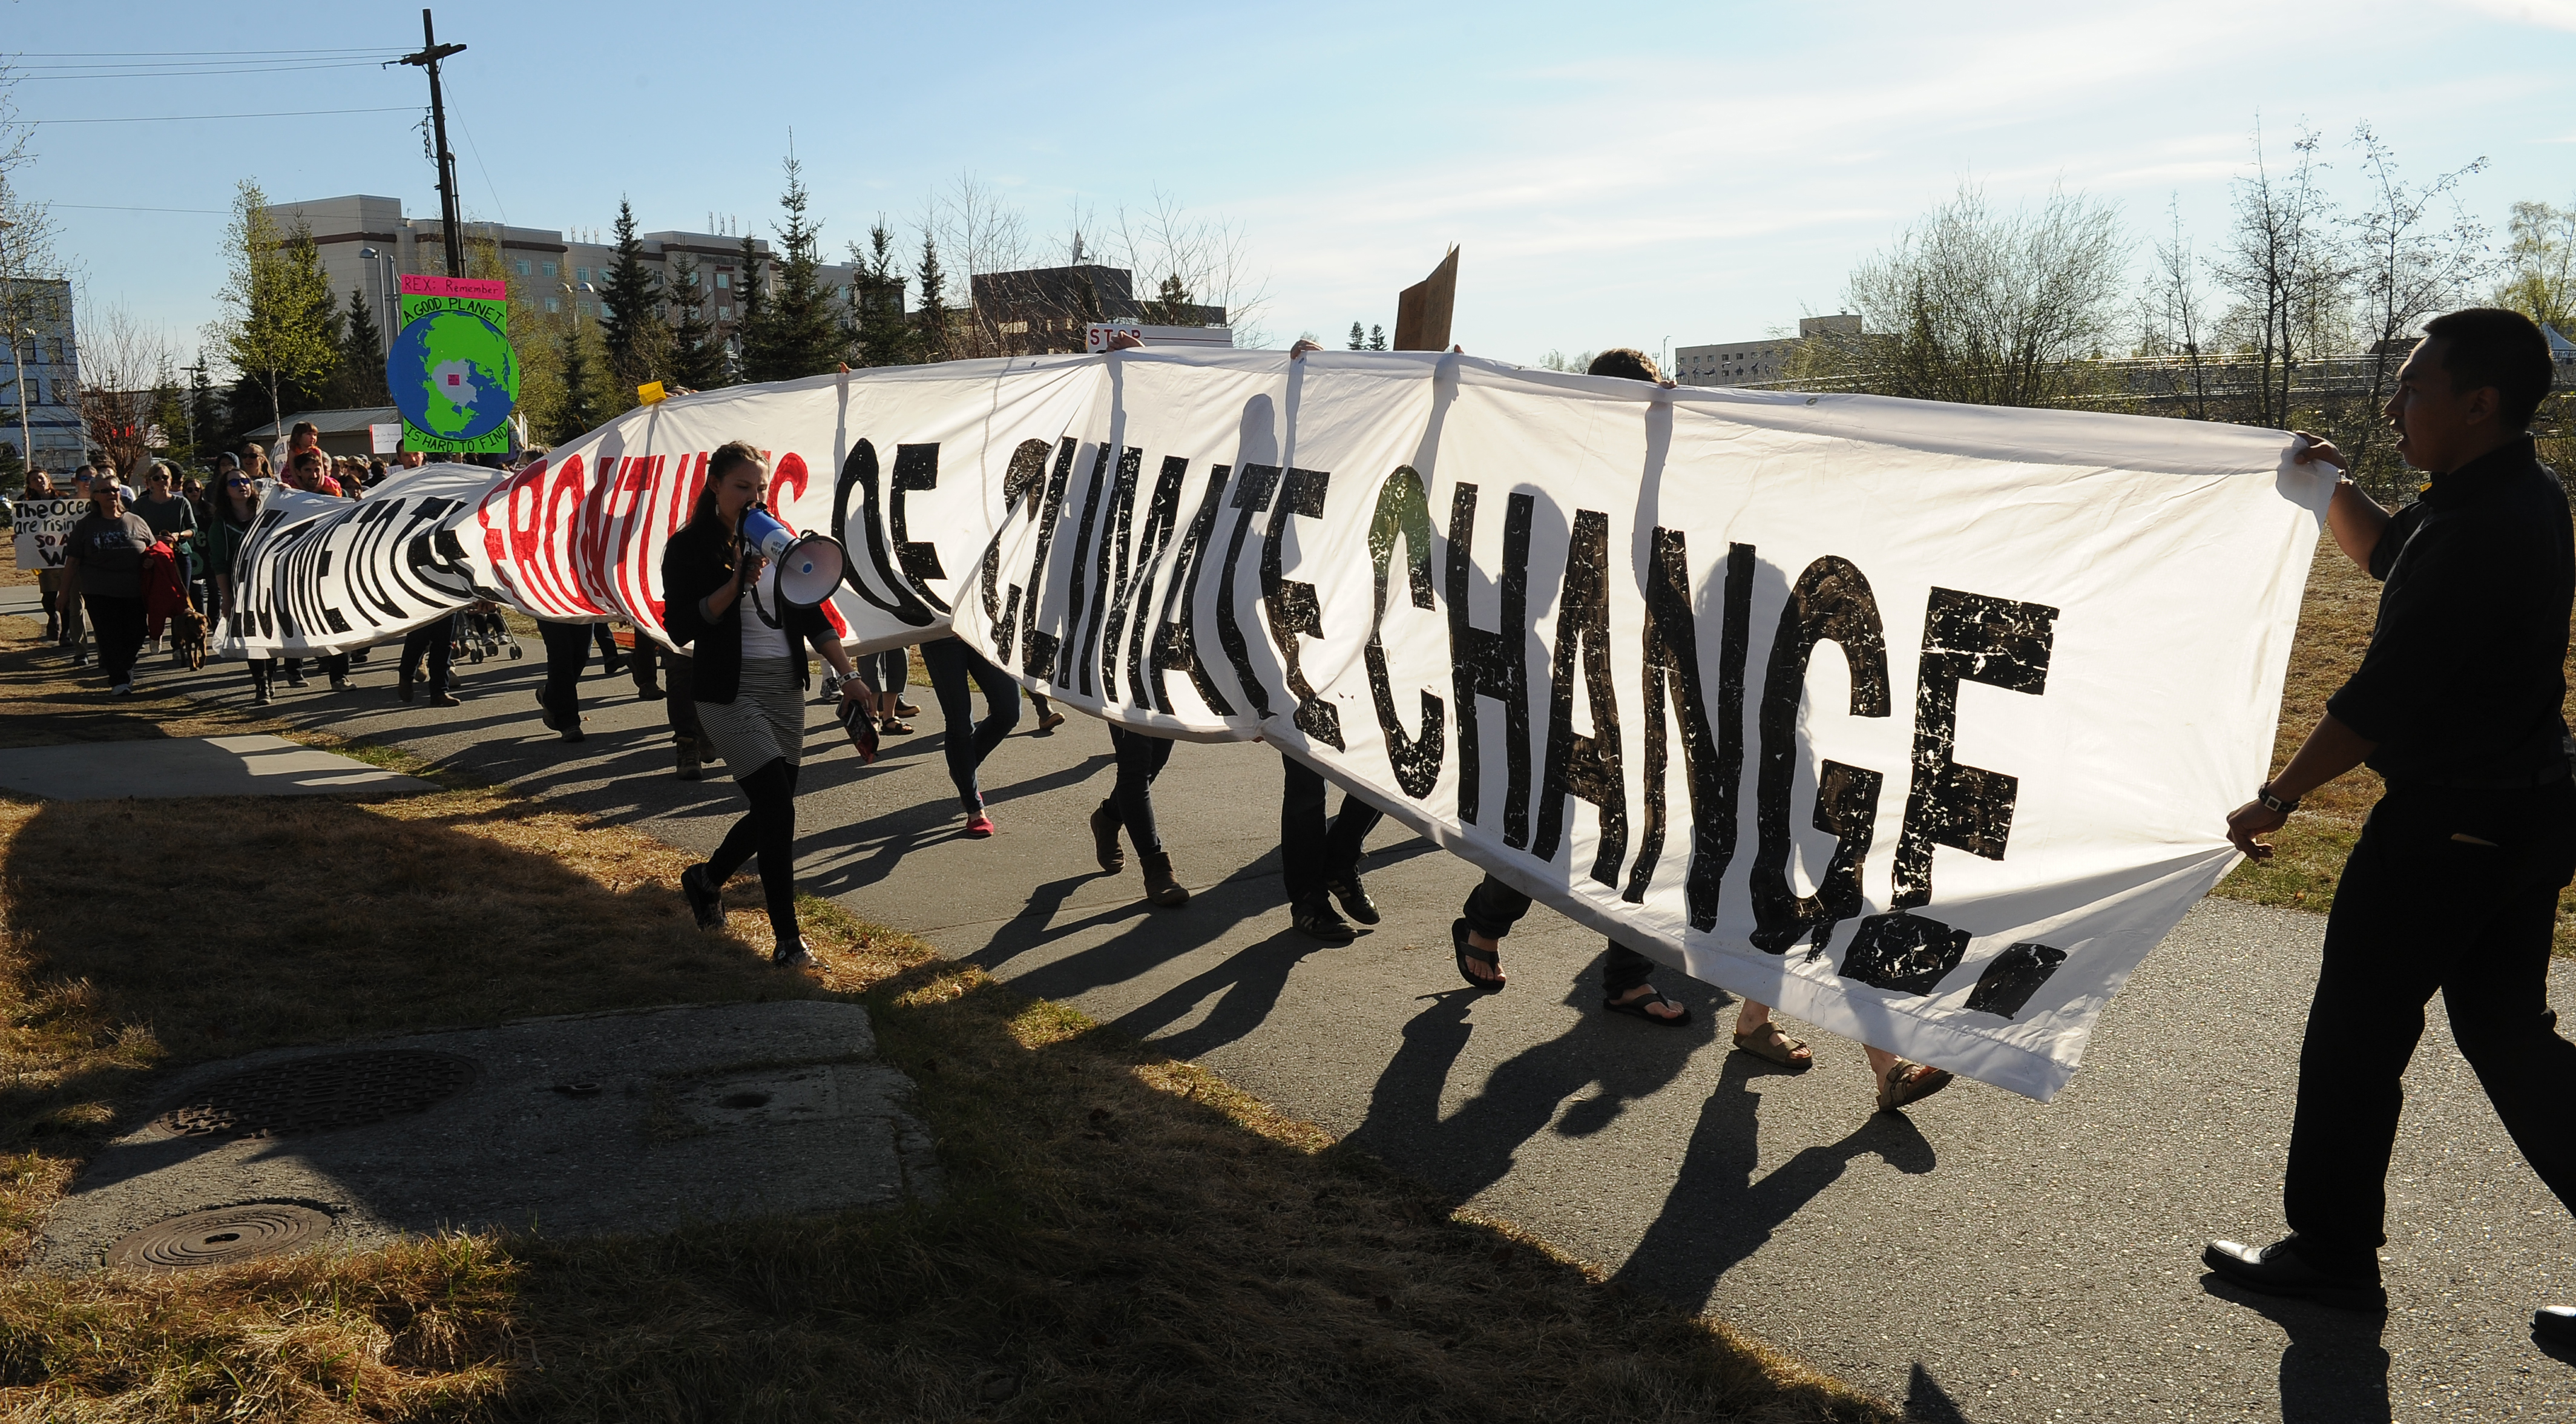 Hundreds of climate change protesters gathered at the Golden Heart Plaza to listen to speakers and then marched around the Morris Thompson Cultural & Visitors Center where Arctic Council attendees were having a reception in downtown Fairbanks, Alaska on Wednesday, May 10, 2017. The protest was organized by Defend the Sacred Alaska a group of Alaska Native and non-native activists from across the state. (Bob Hallinen / Alaska Dispatch News)